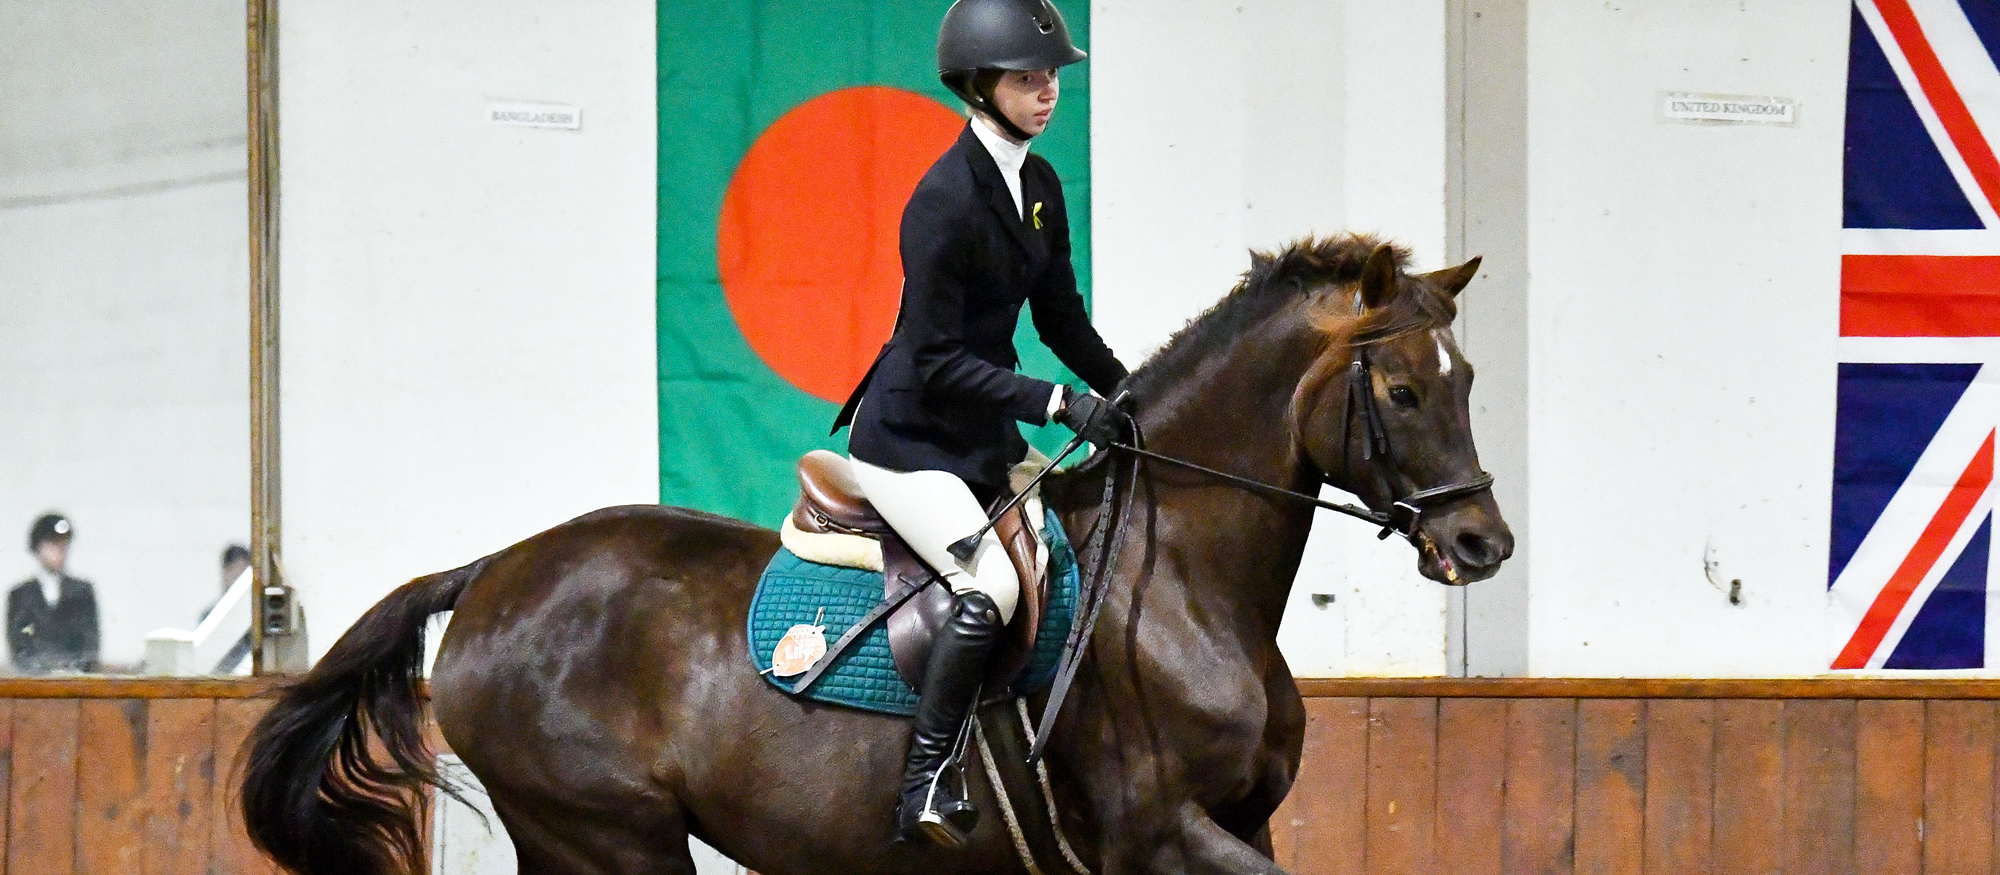 Emmie Mirarchi placed second in Team Intermediate Equitation on the Flat on the first day of the IHSA National Championships, May 4, 2023 in Lexington, Ky. (RJB Sports file photo)